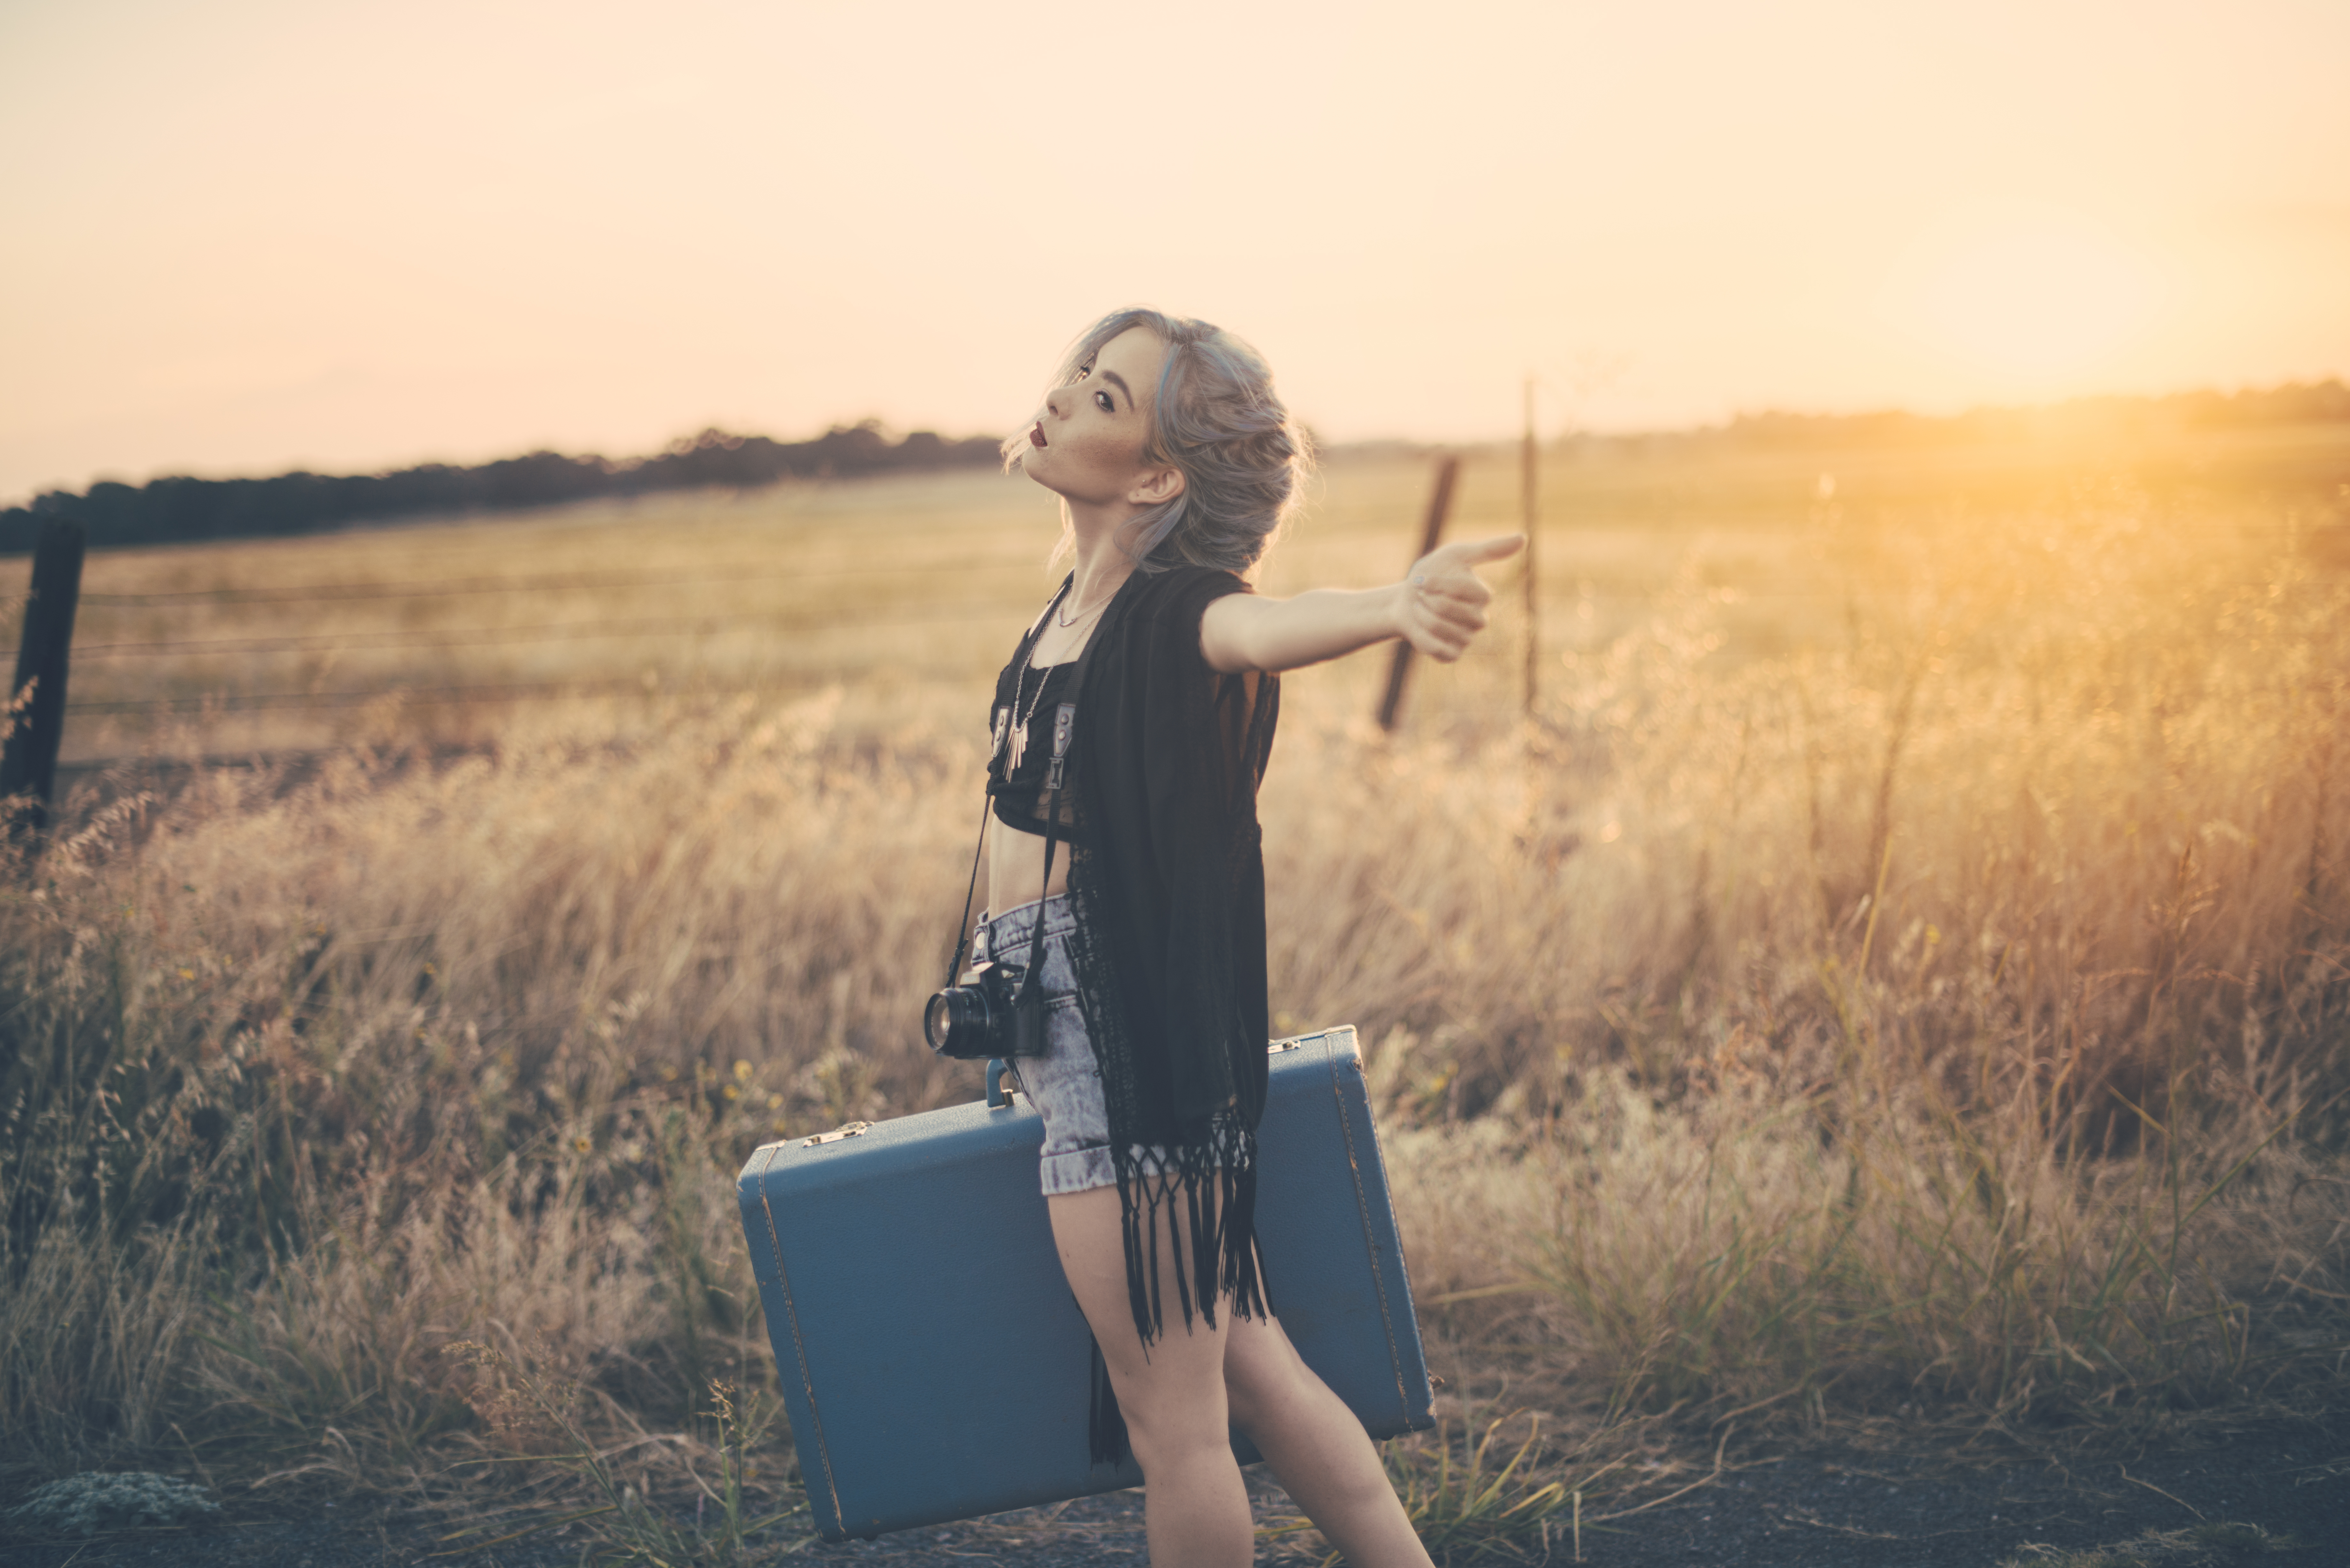 Full HD suitcase, women, mood, brown eyes, camera, model, outdoor, sunny